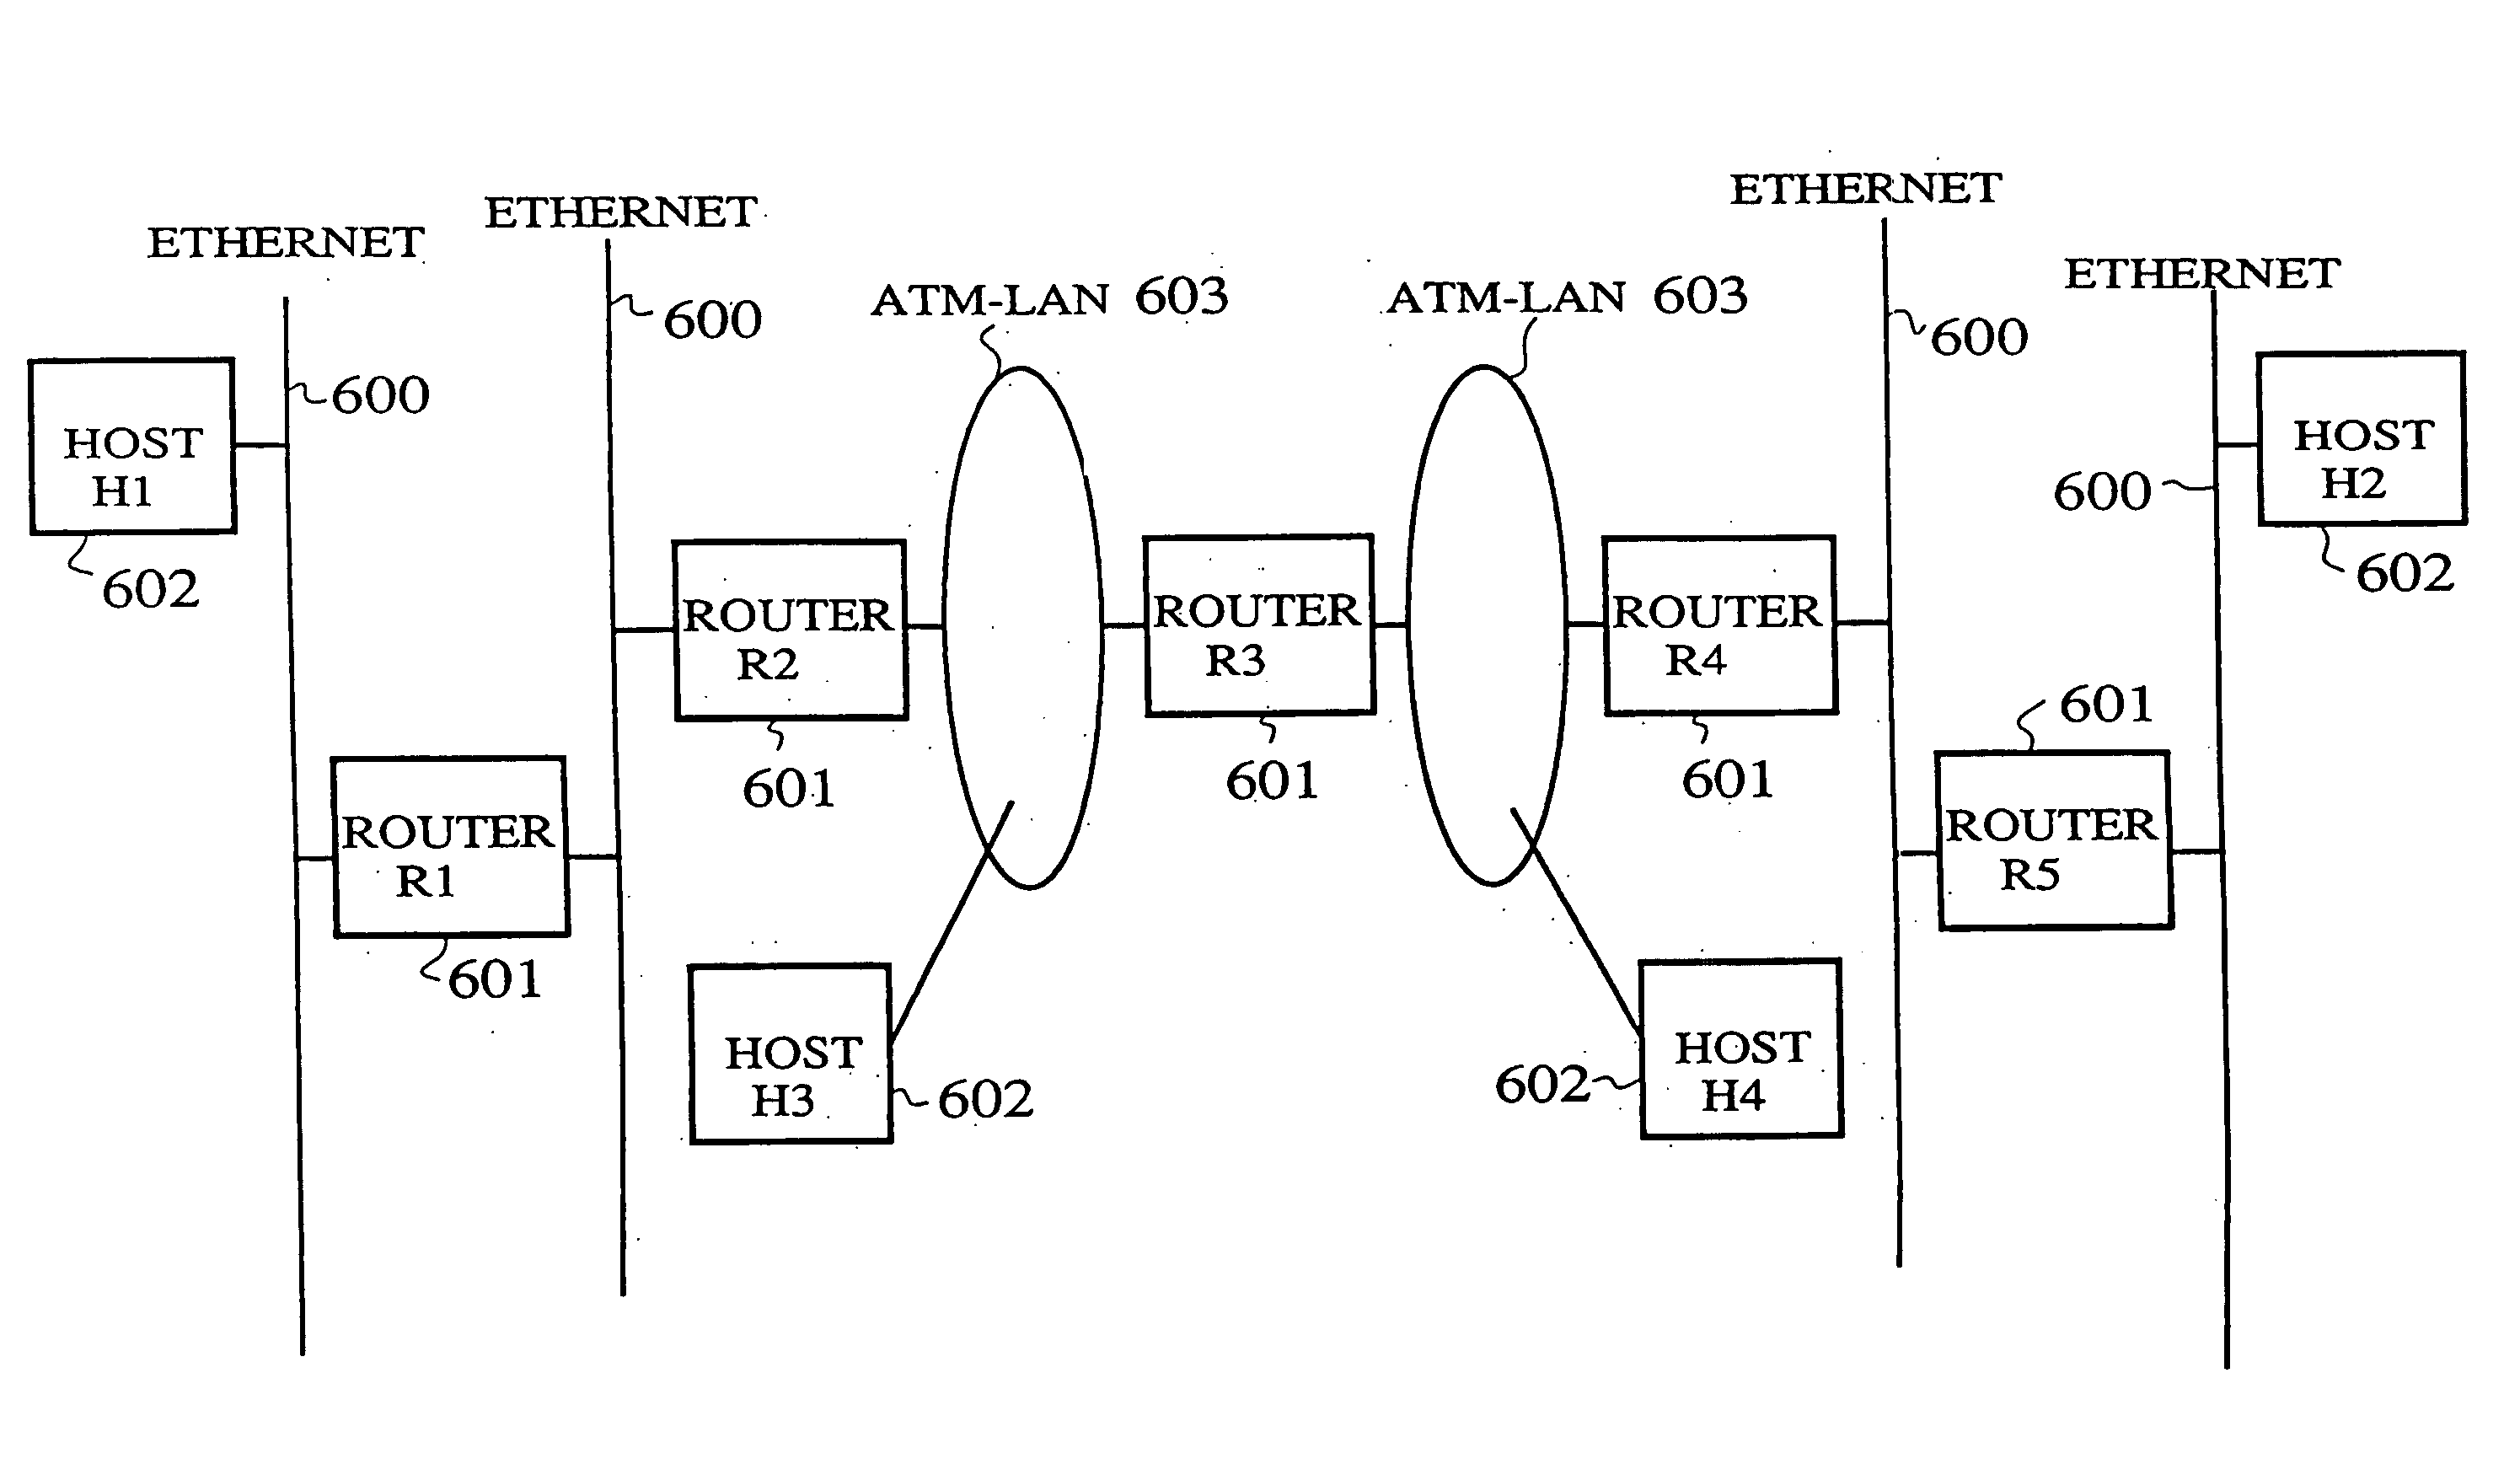 Network interconnection apparatus, network node apparatus, and packet transfer method for high speed, large capacity inter-network communication